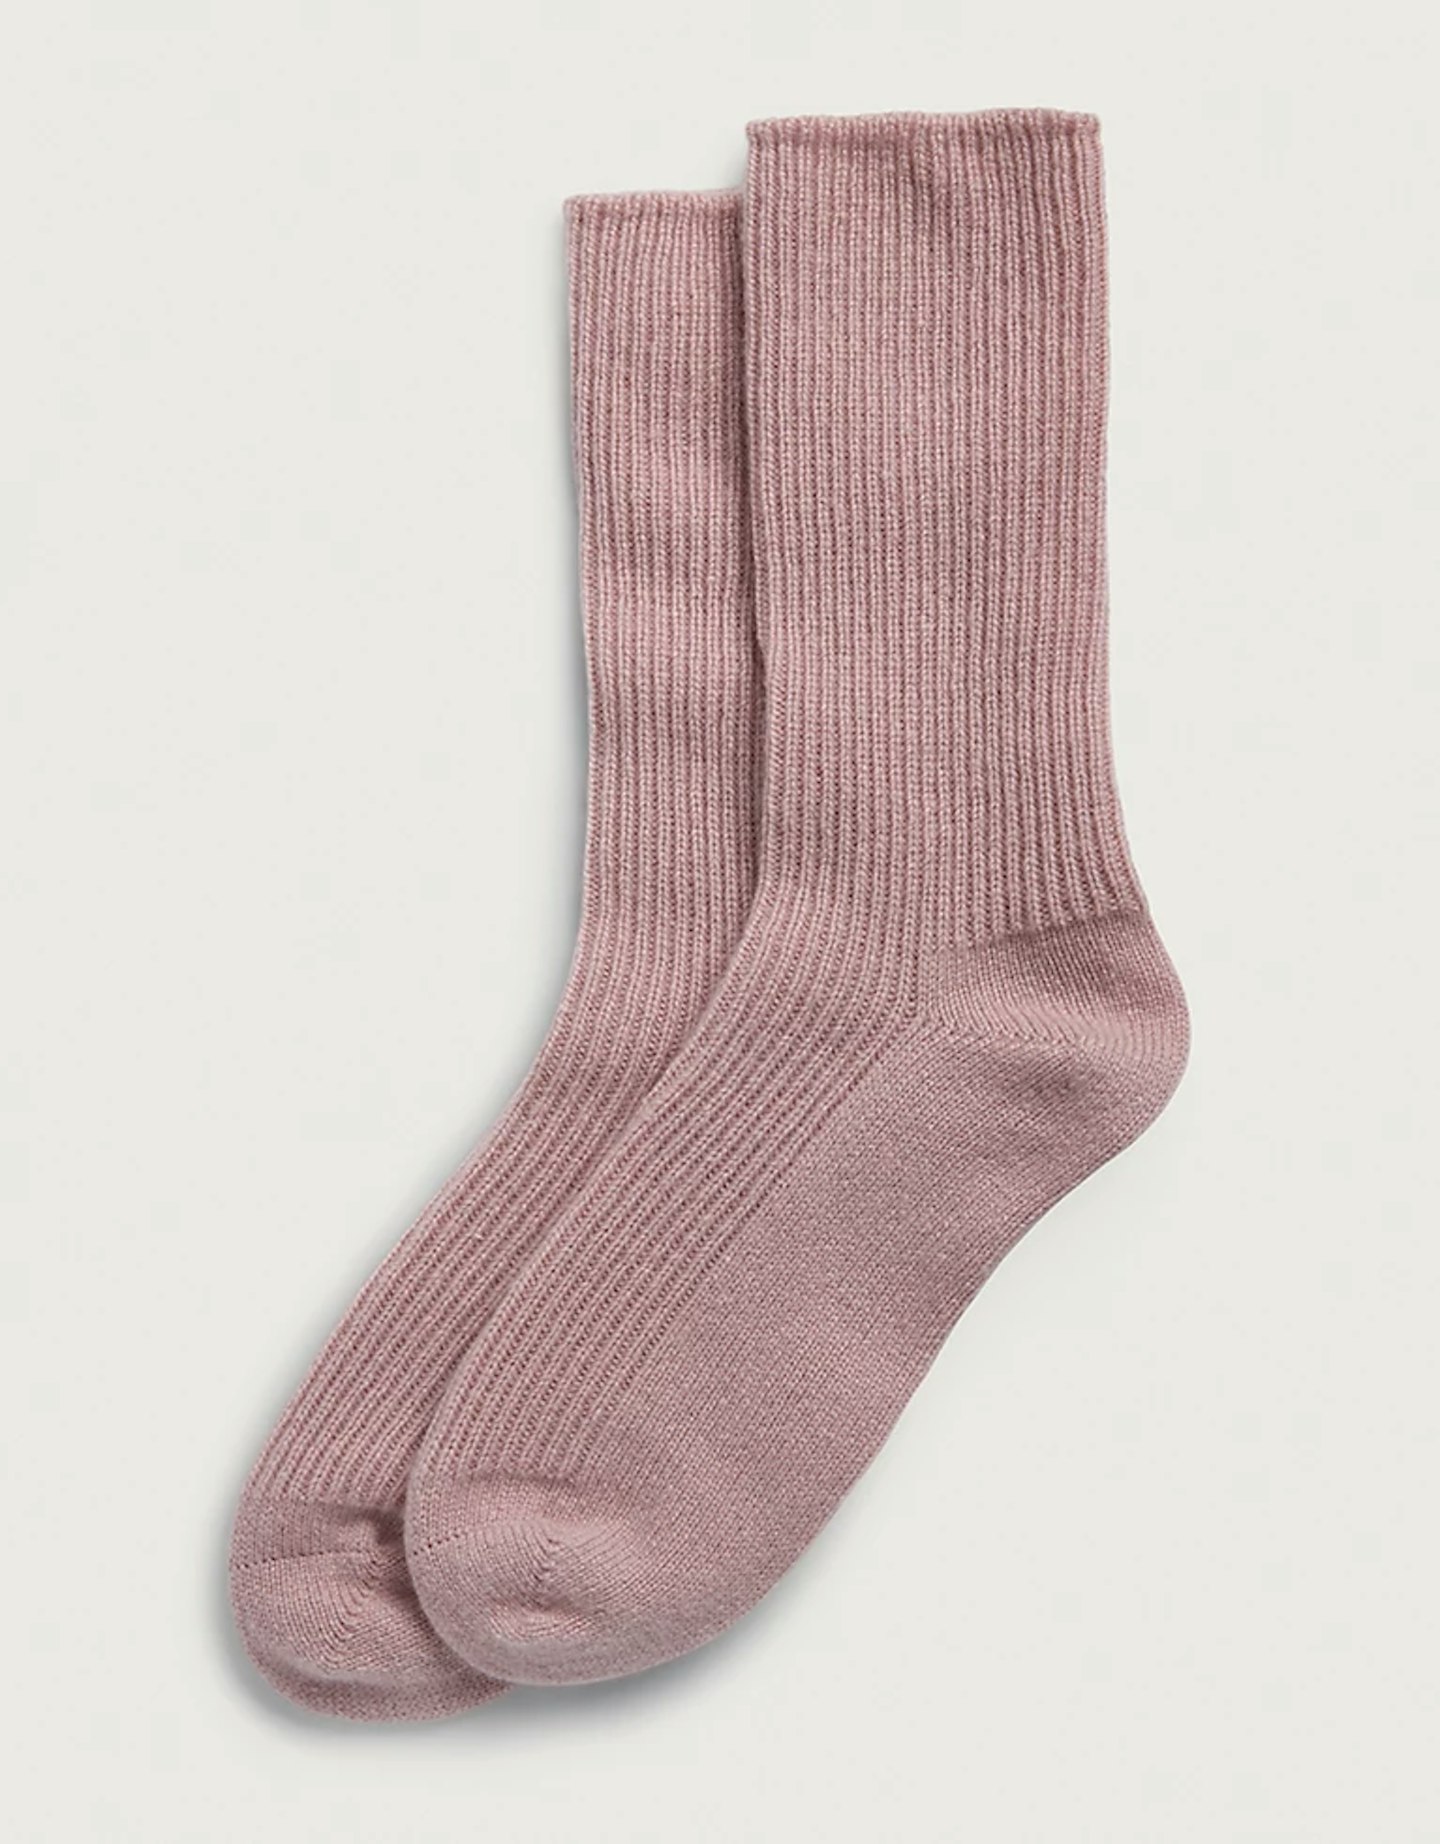 The White Company, Cashmere Bed Socks